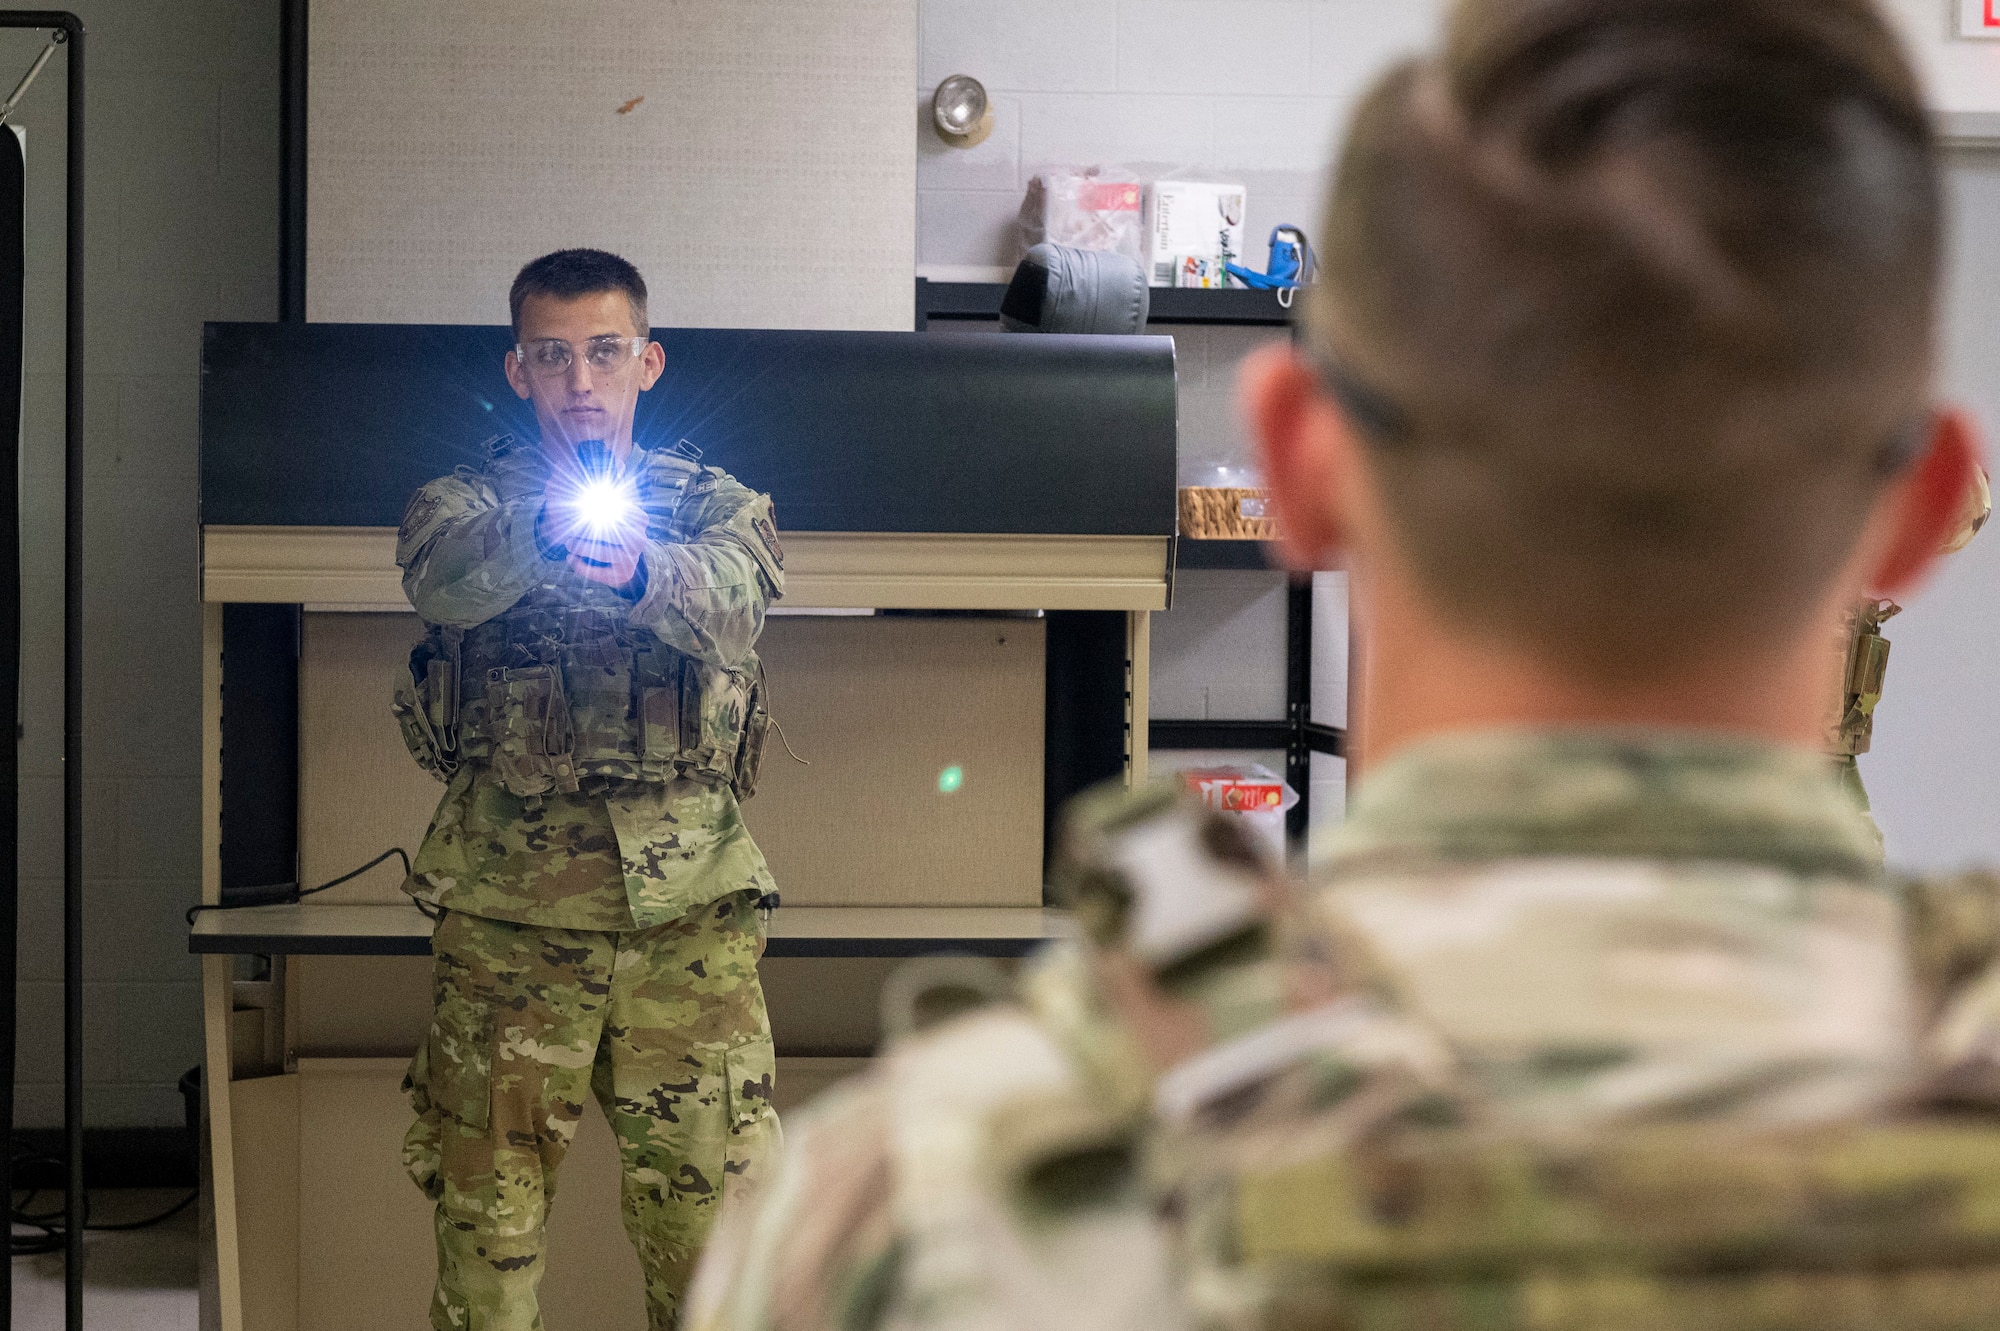 U.S. Air Force Airman 1st Class Dylan Ramsey, a defender with the 167th Security Forces Squadron, aims a trainer taser as part of a mock taser deployment training during June’s unit training assembly at the 167th Airlift Wing, Martinsburg, West Virginia, June 10, 2022. Trainings like these allow security forces personnel to become more familiar with their weapon platforms and practice using non-lethal force.